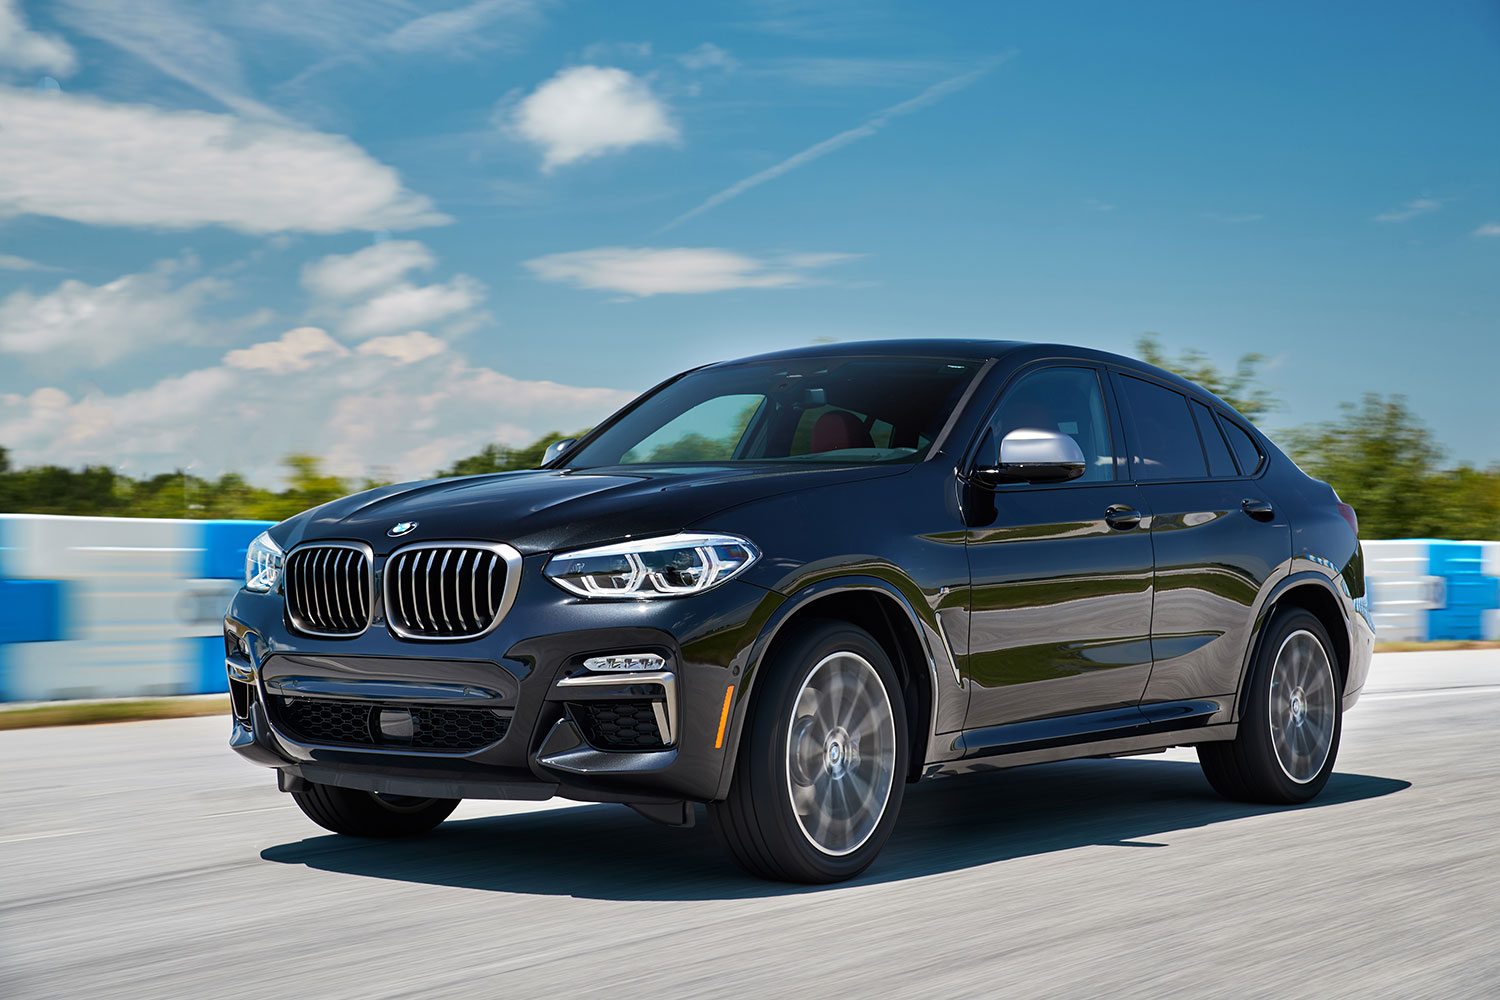 2019 BMW X4 M40i Review: 5 Things You Need To Know